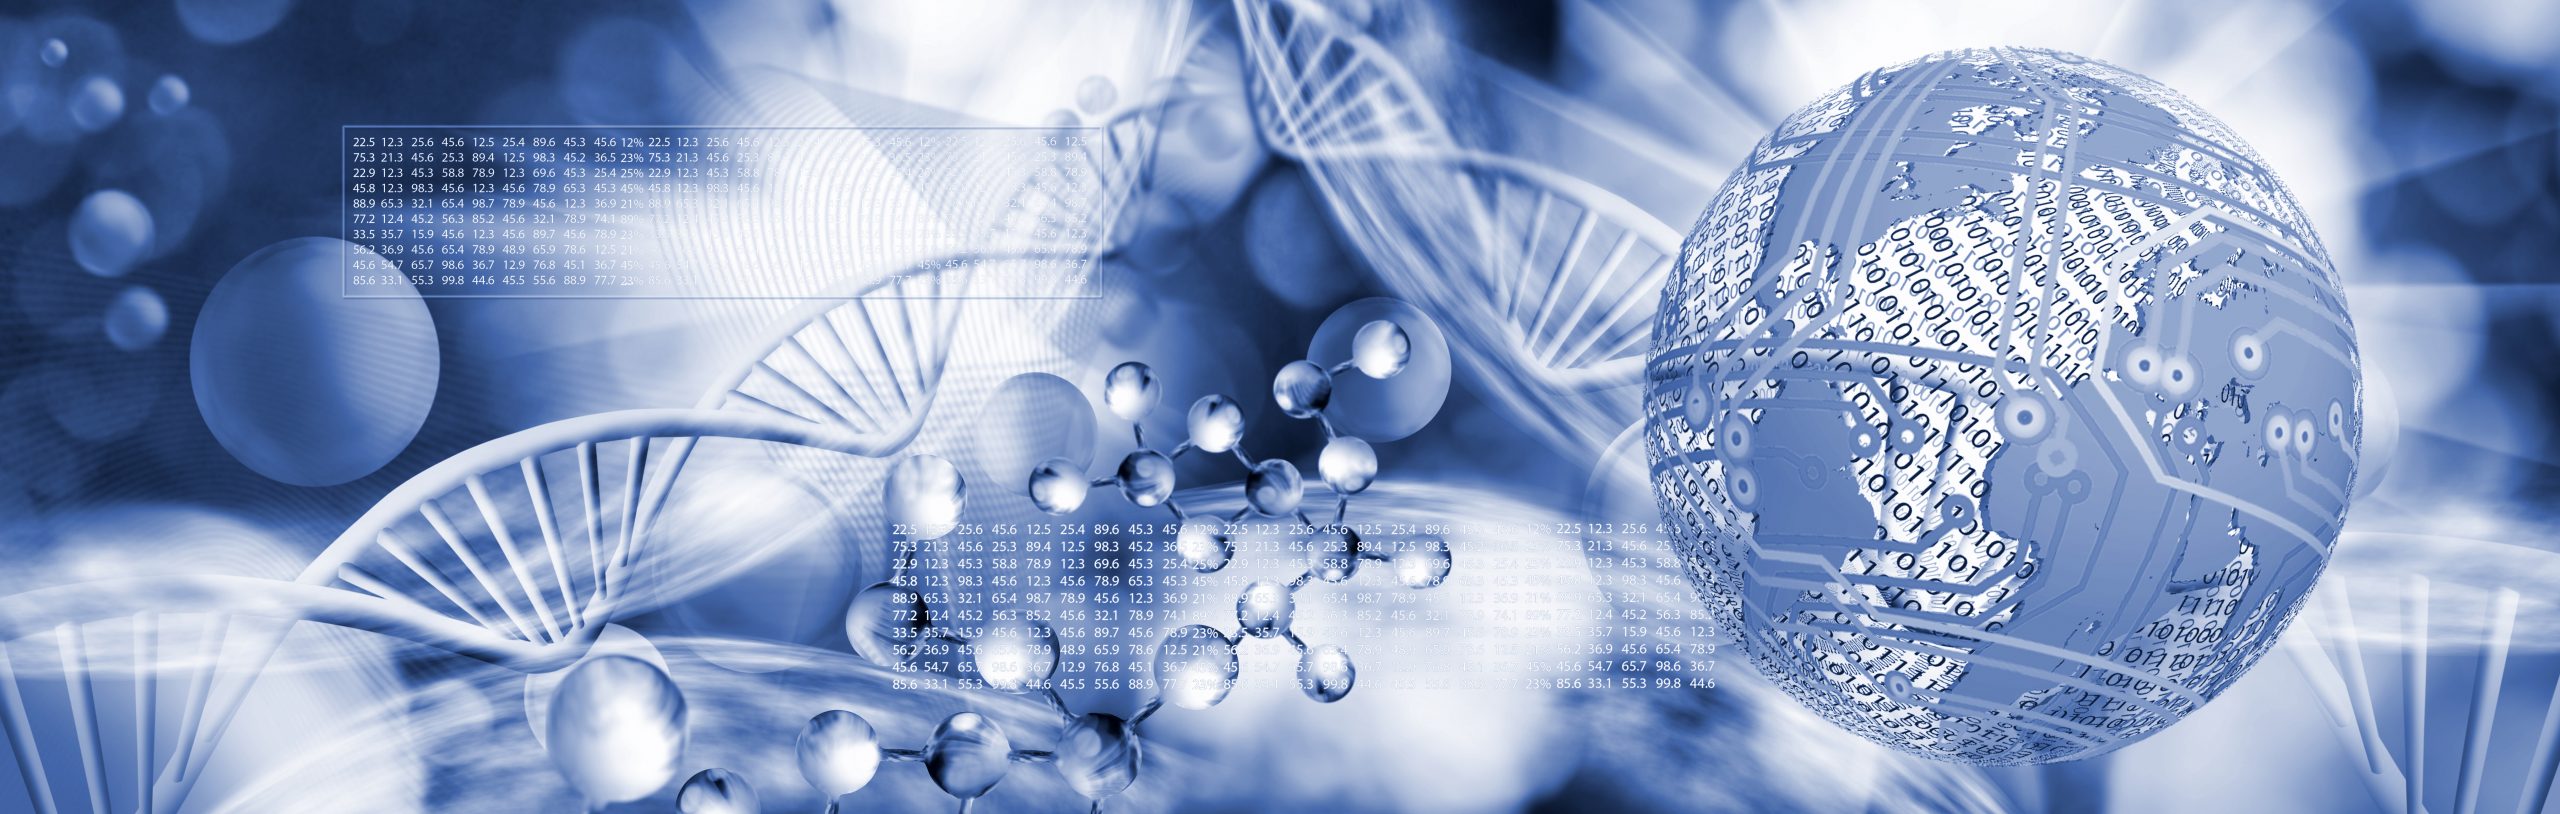 Abstract image of dna chain on blurred background closup.Stylized image of the globe